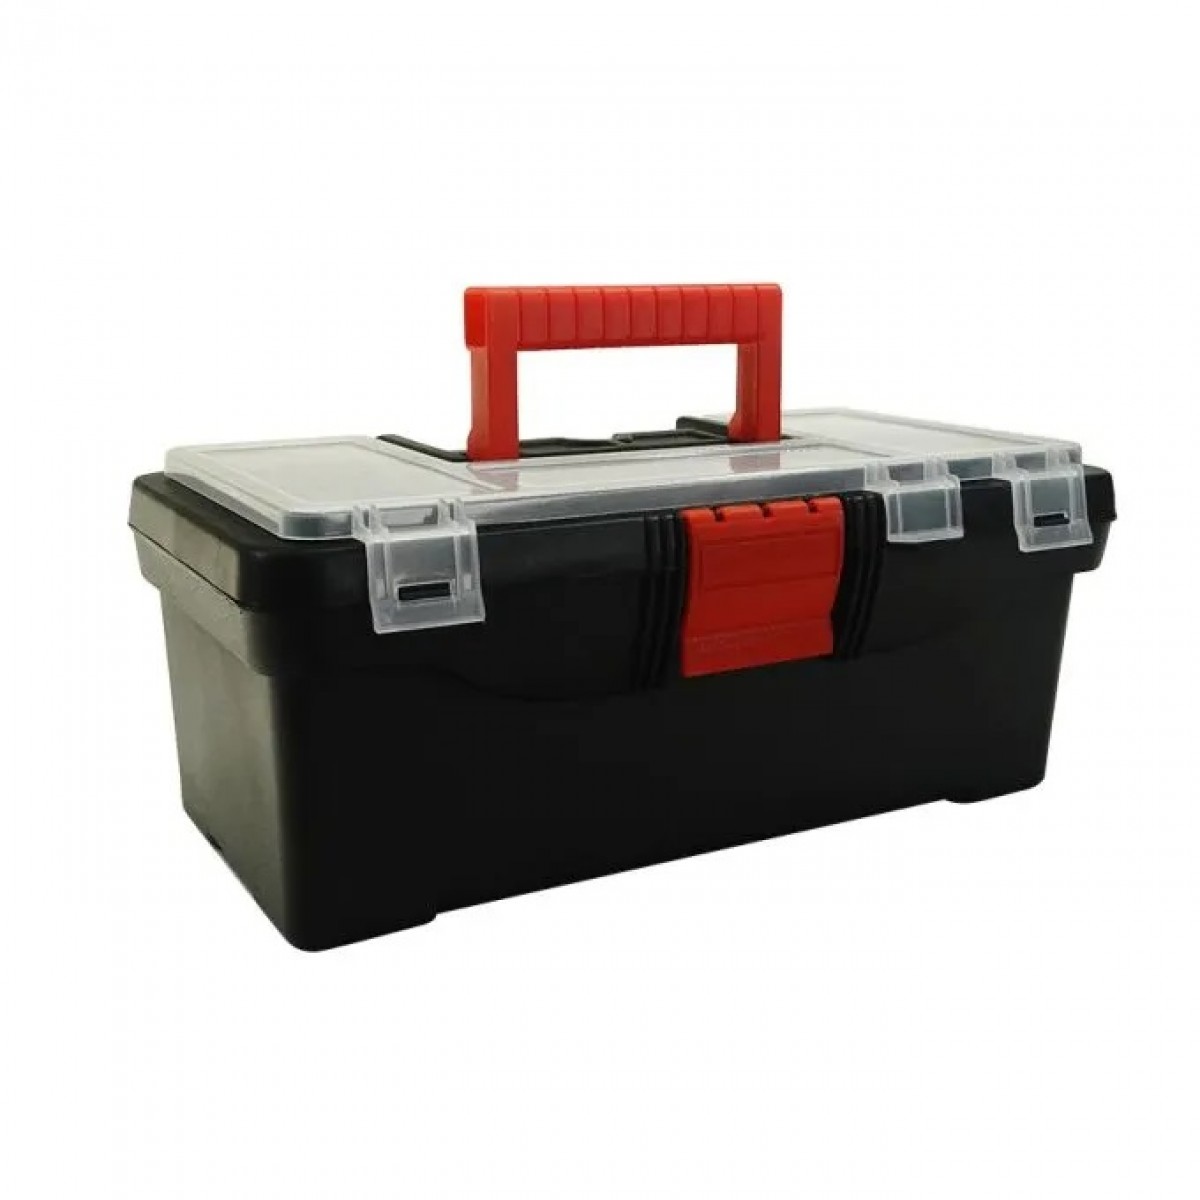 AddTools Small Tool Box with Removable Tray - 32 cm x 18 cm x 13 cm - 922796